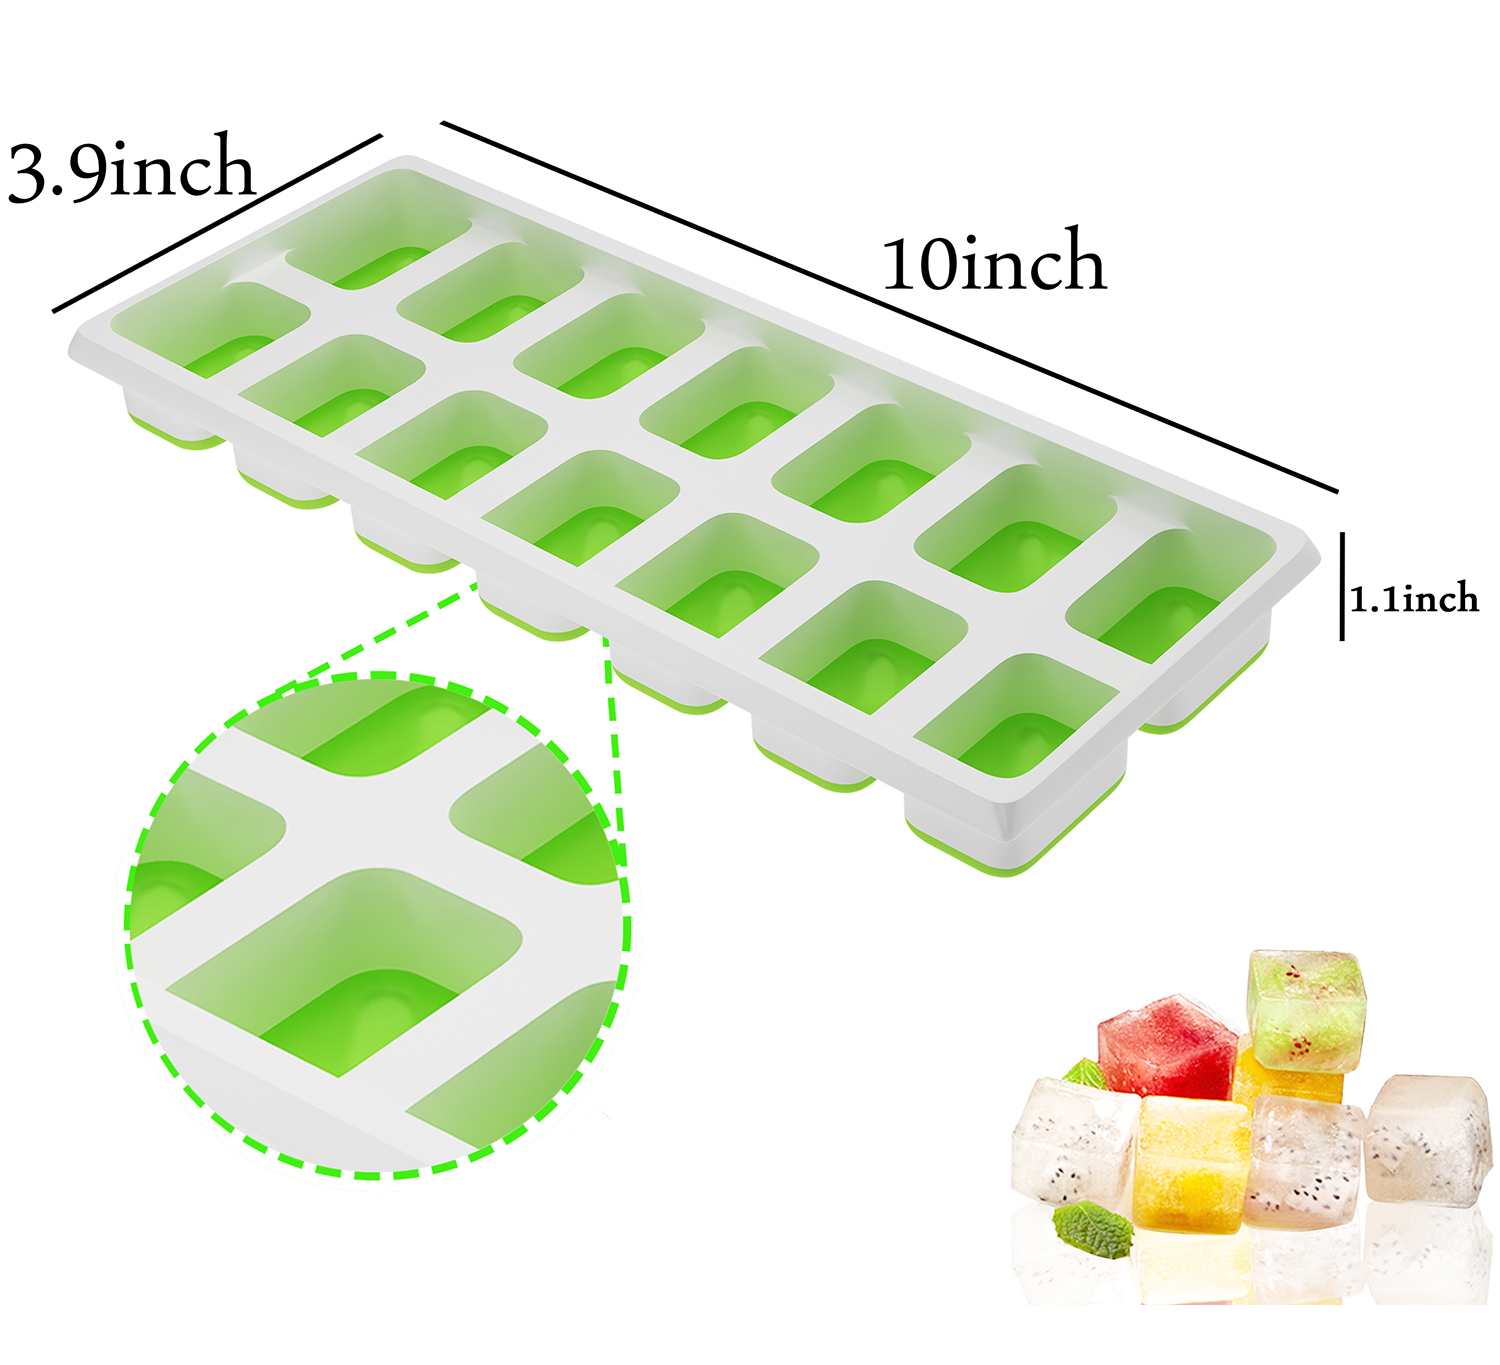 EDEFISY Ice Cube Tray with Lid 4 Pack, BPA Free